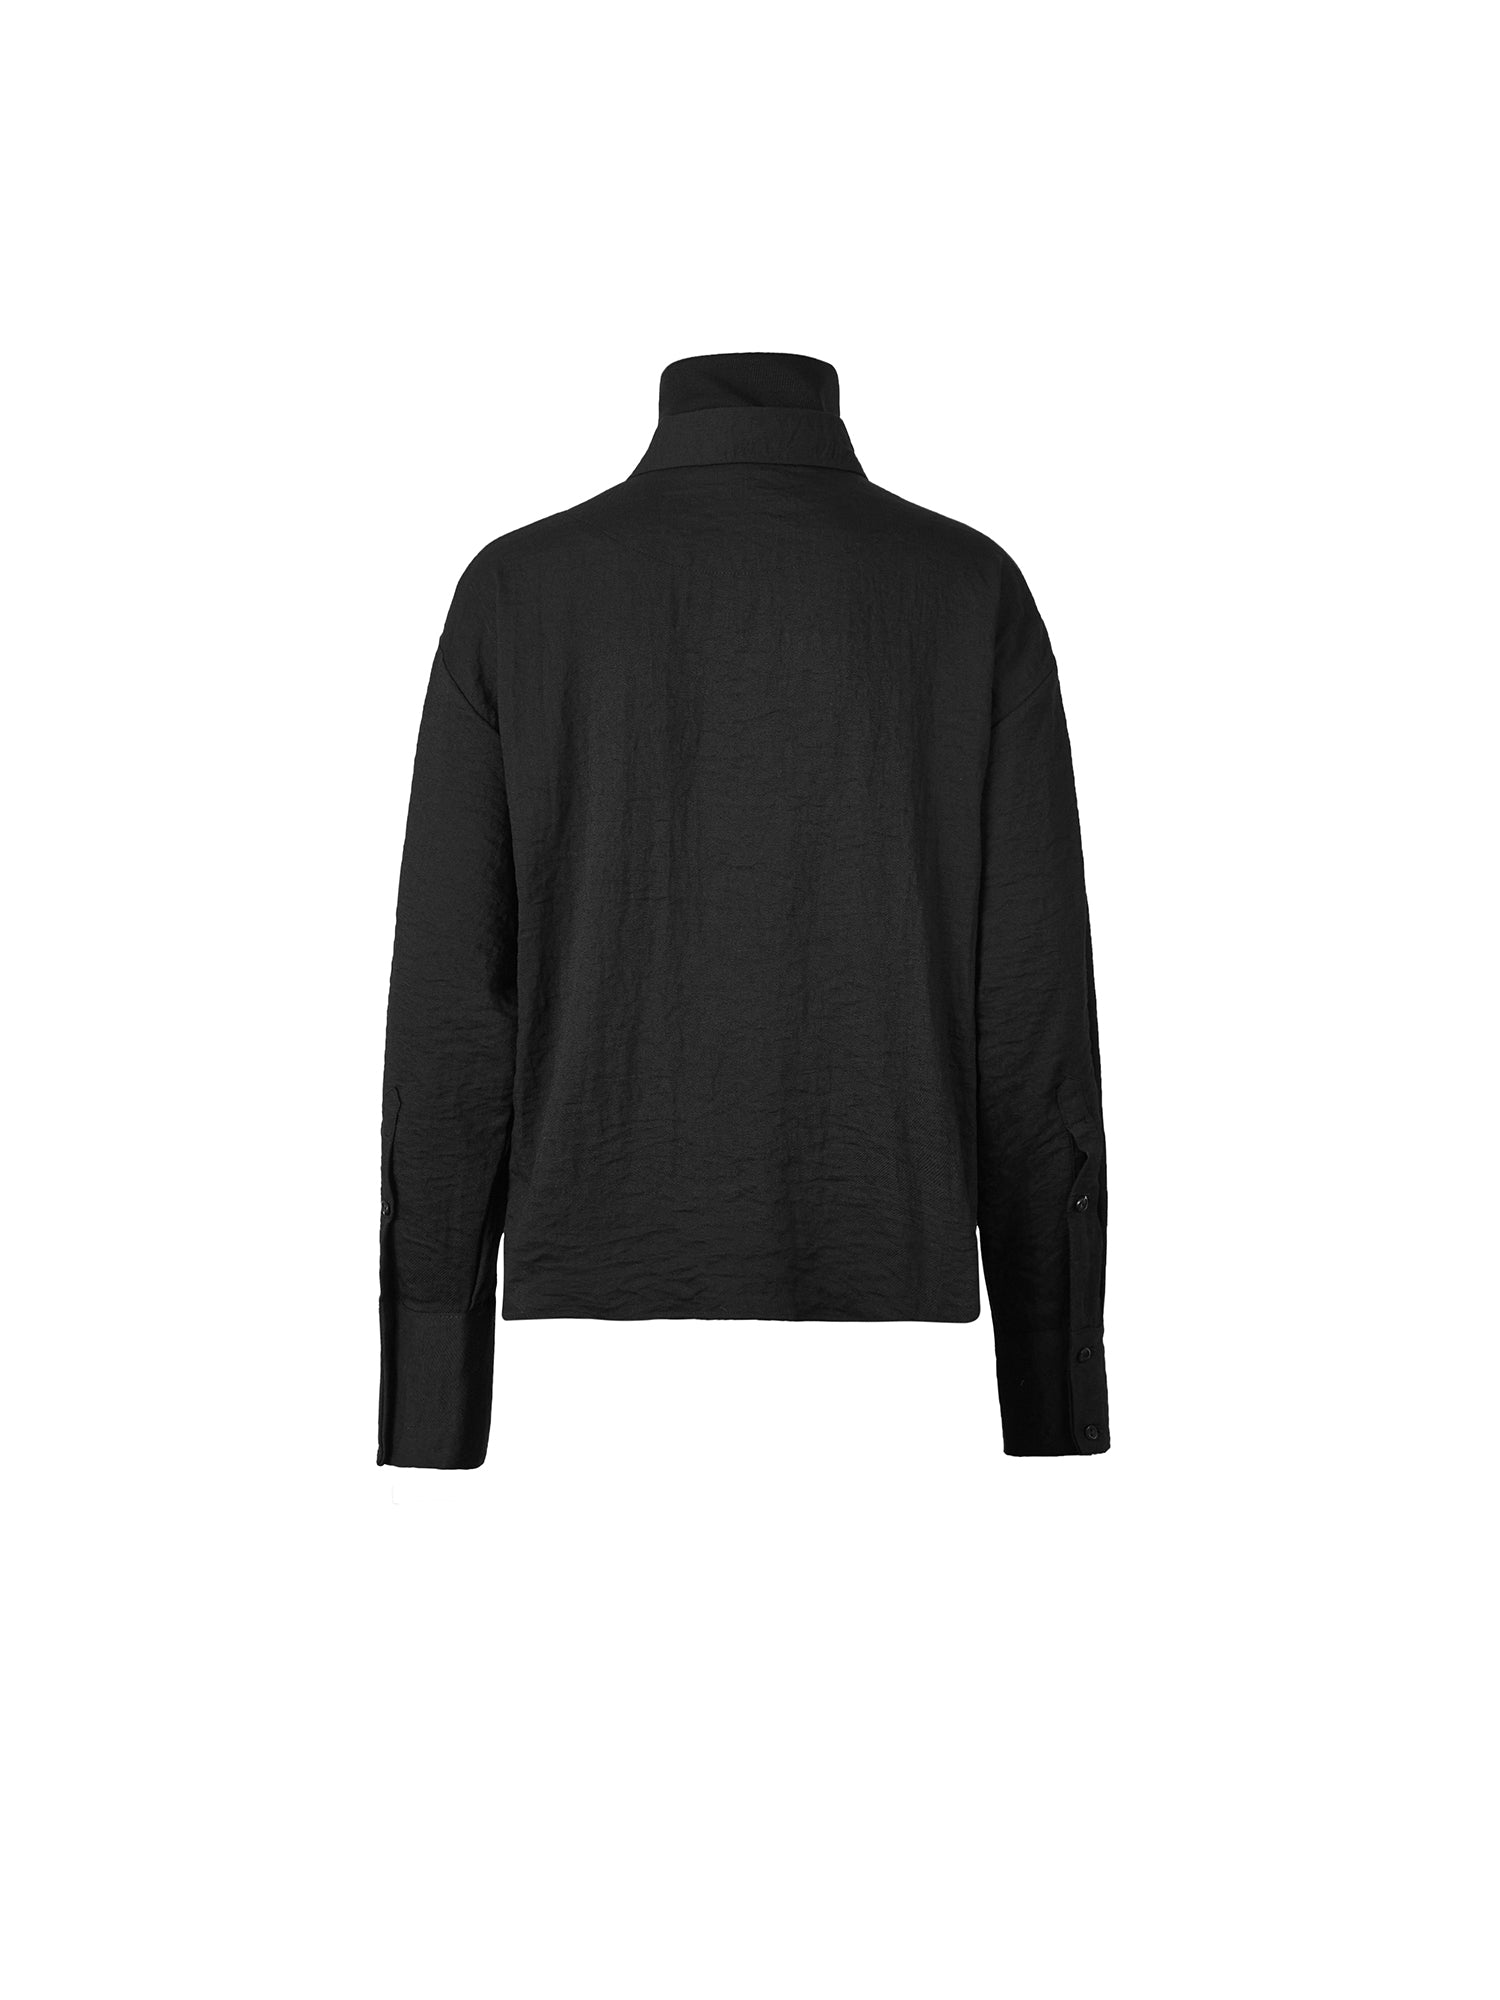 Short Black Shirt With Knit Stitching And Drop Sleeves